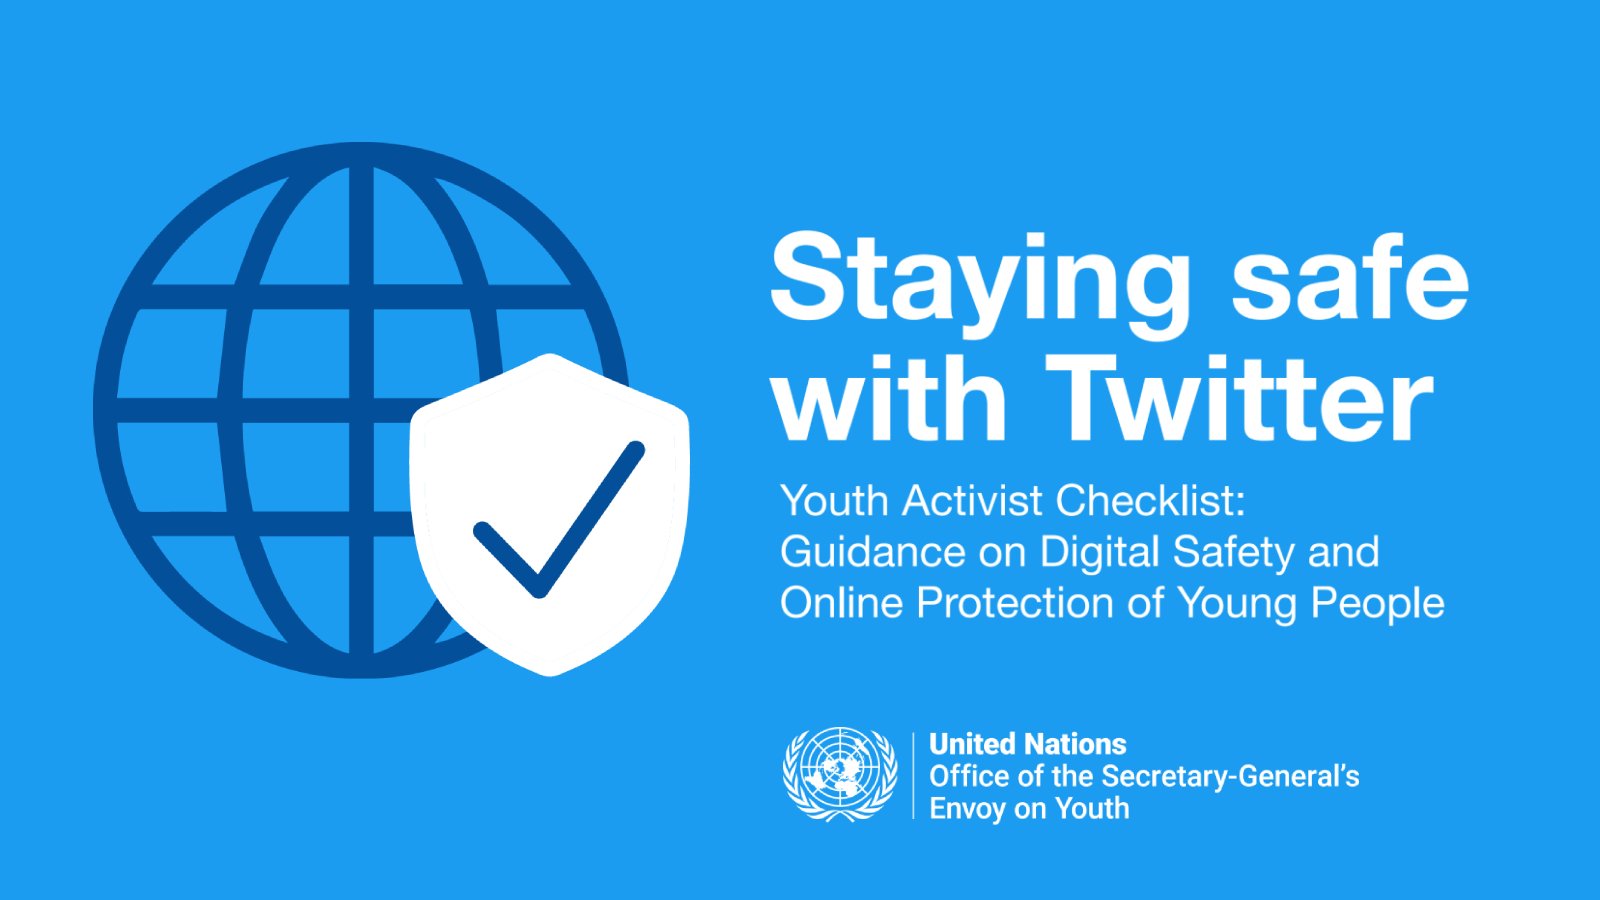 Youth Activist Checklist: Guidance on Digital Safety and Online Protection of Young People